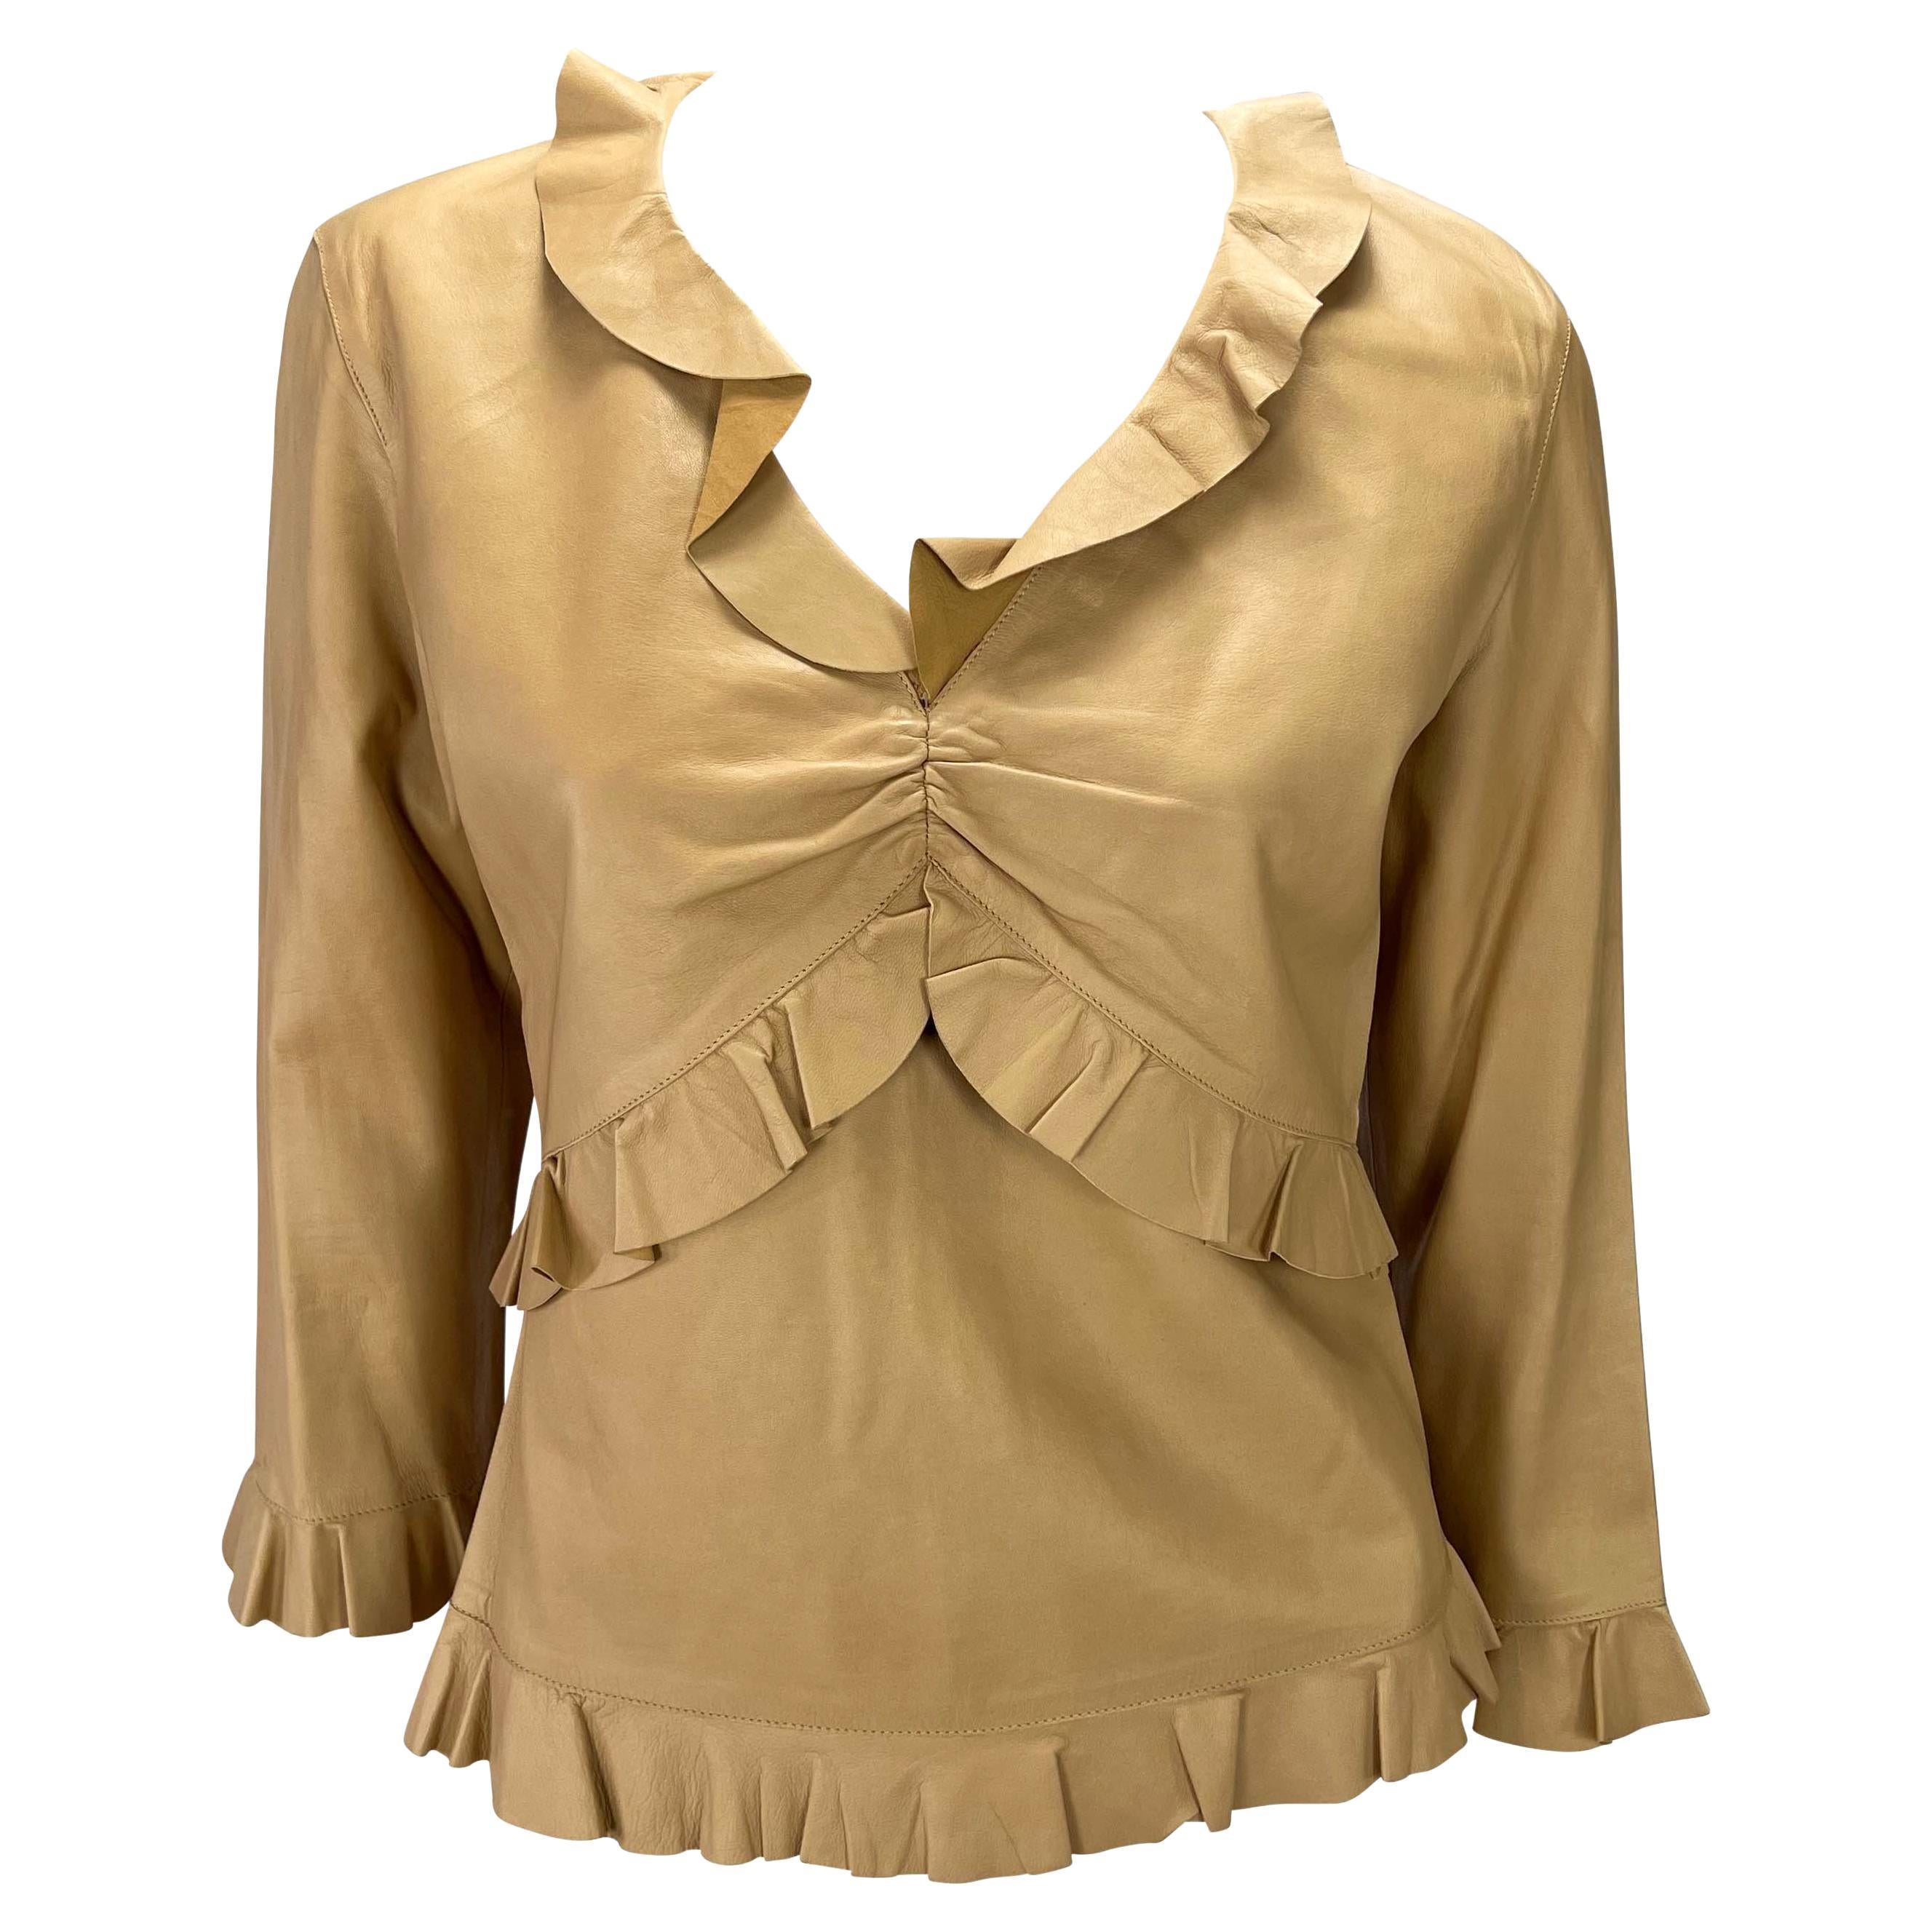 S/S 1999 Gucci by Tom Ford Saddle Brown Ruffle Leather V-Neck Blouse